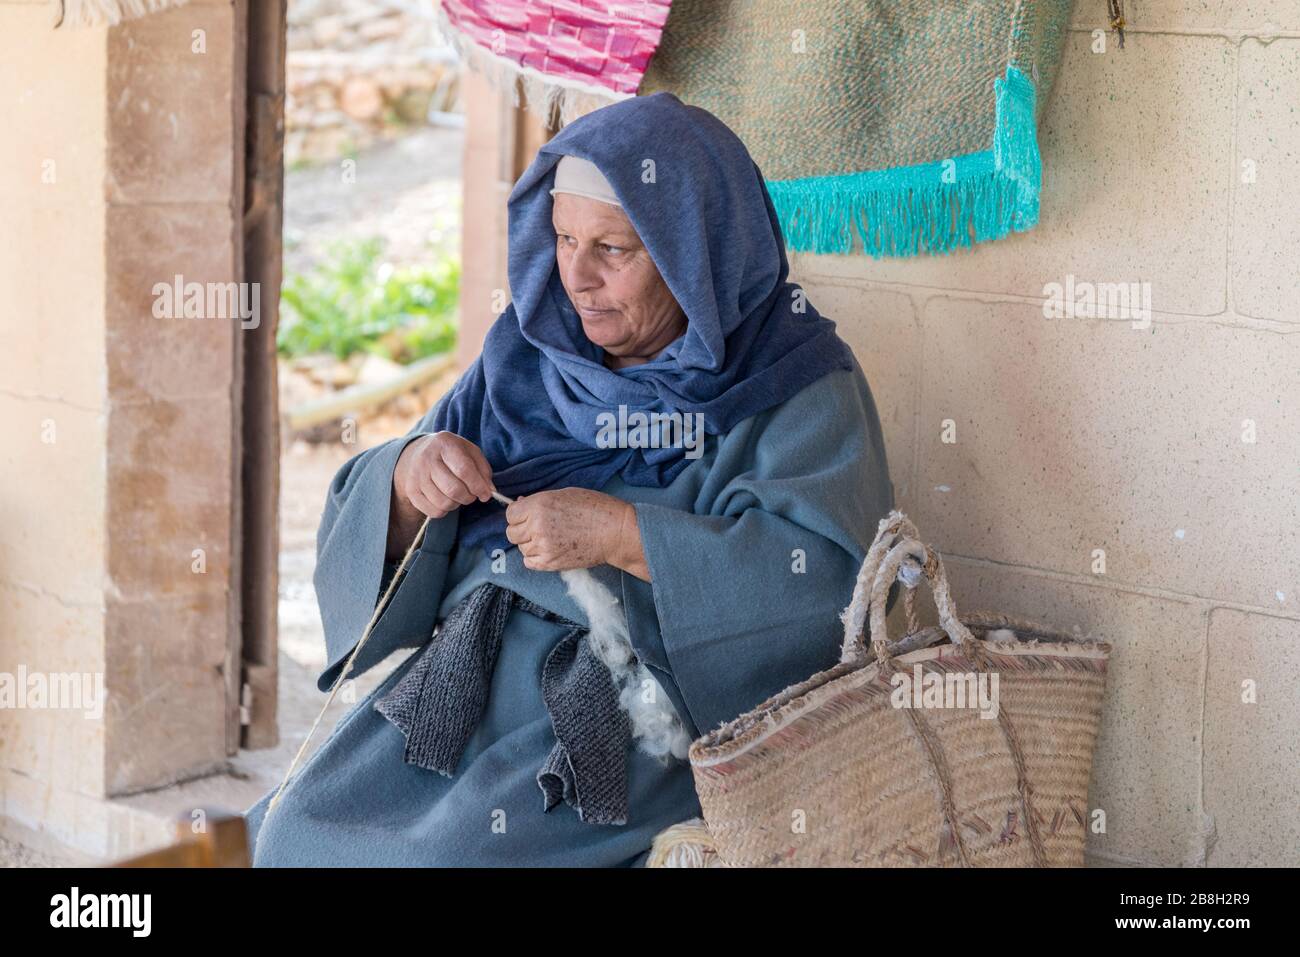 An elderly woman working on wool with her hands in the village of Ghajnsielem in Gozo, Malta Stock Photo